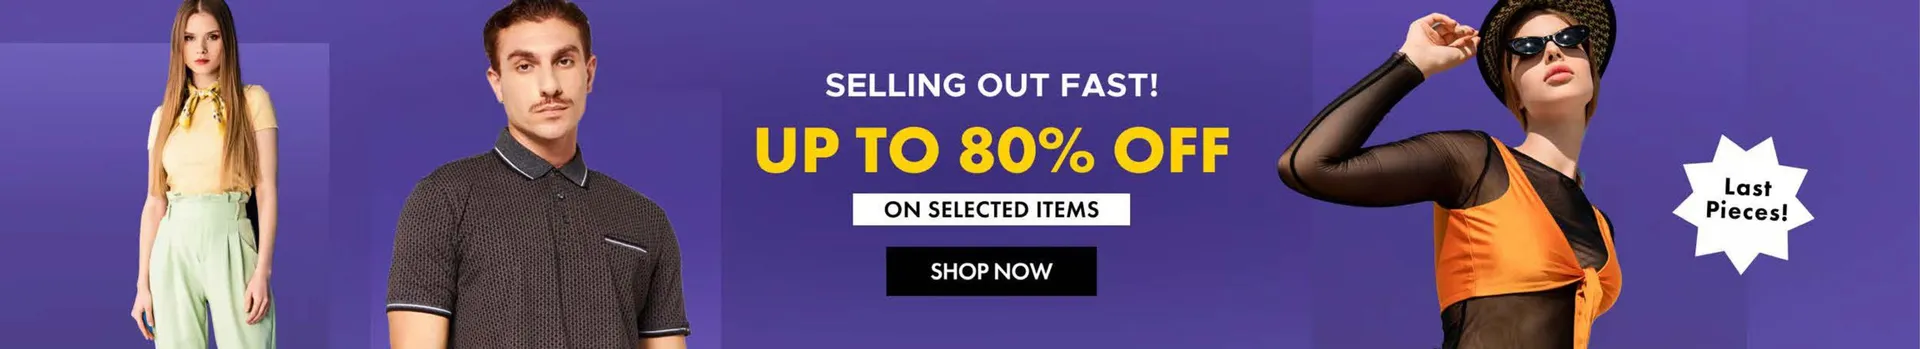 Up to 80% Off - 1